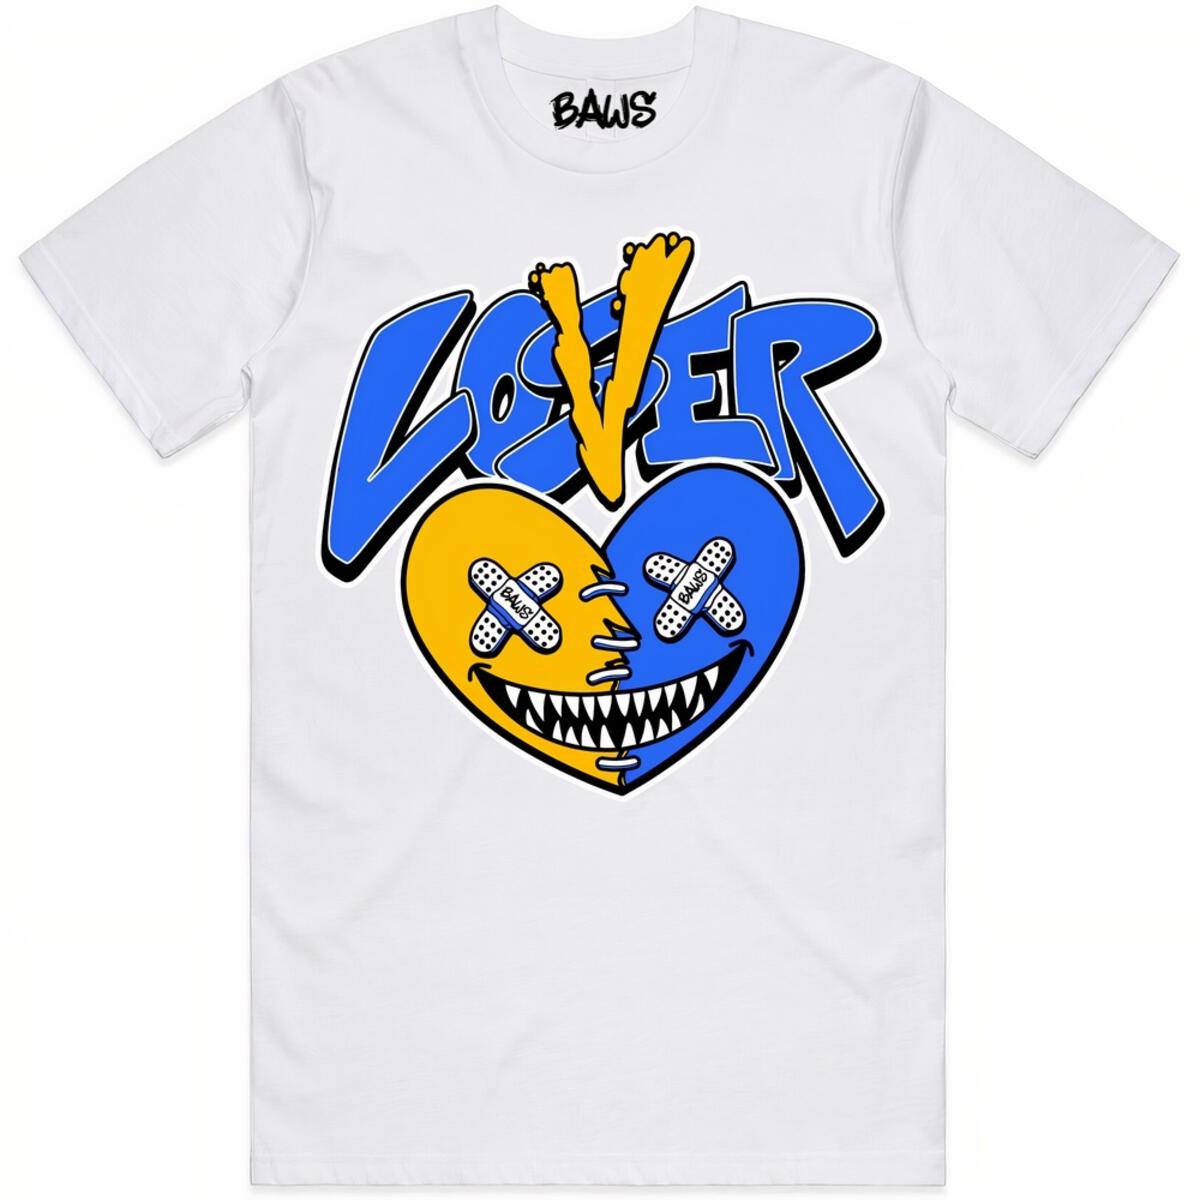 BAWS LANEY LOVER LOSER WHITE BAWS T-SHIRT